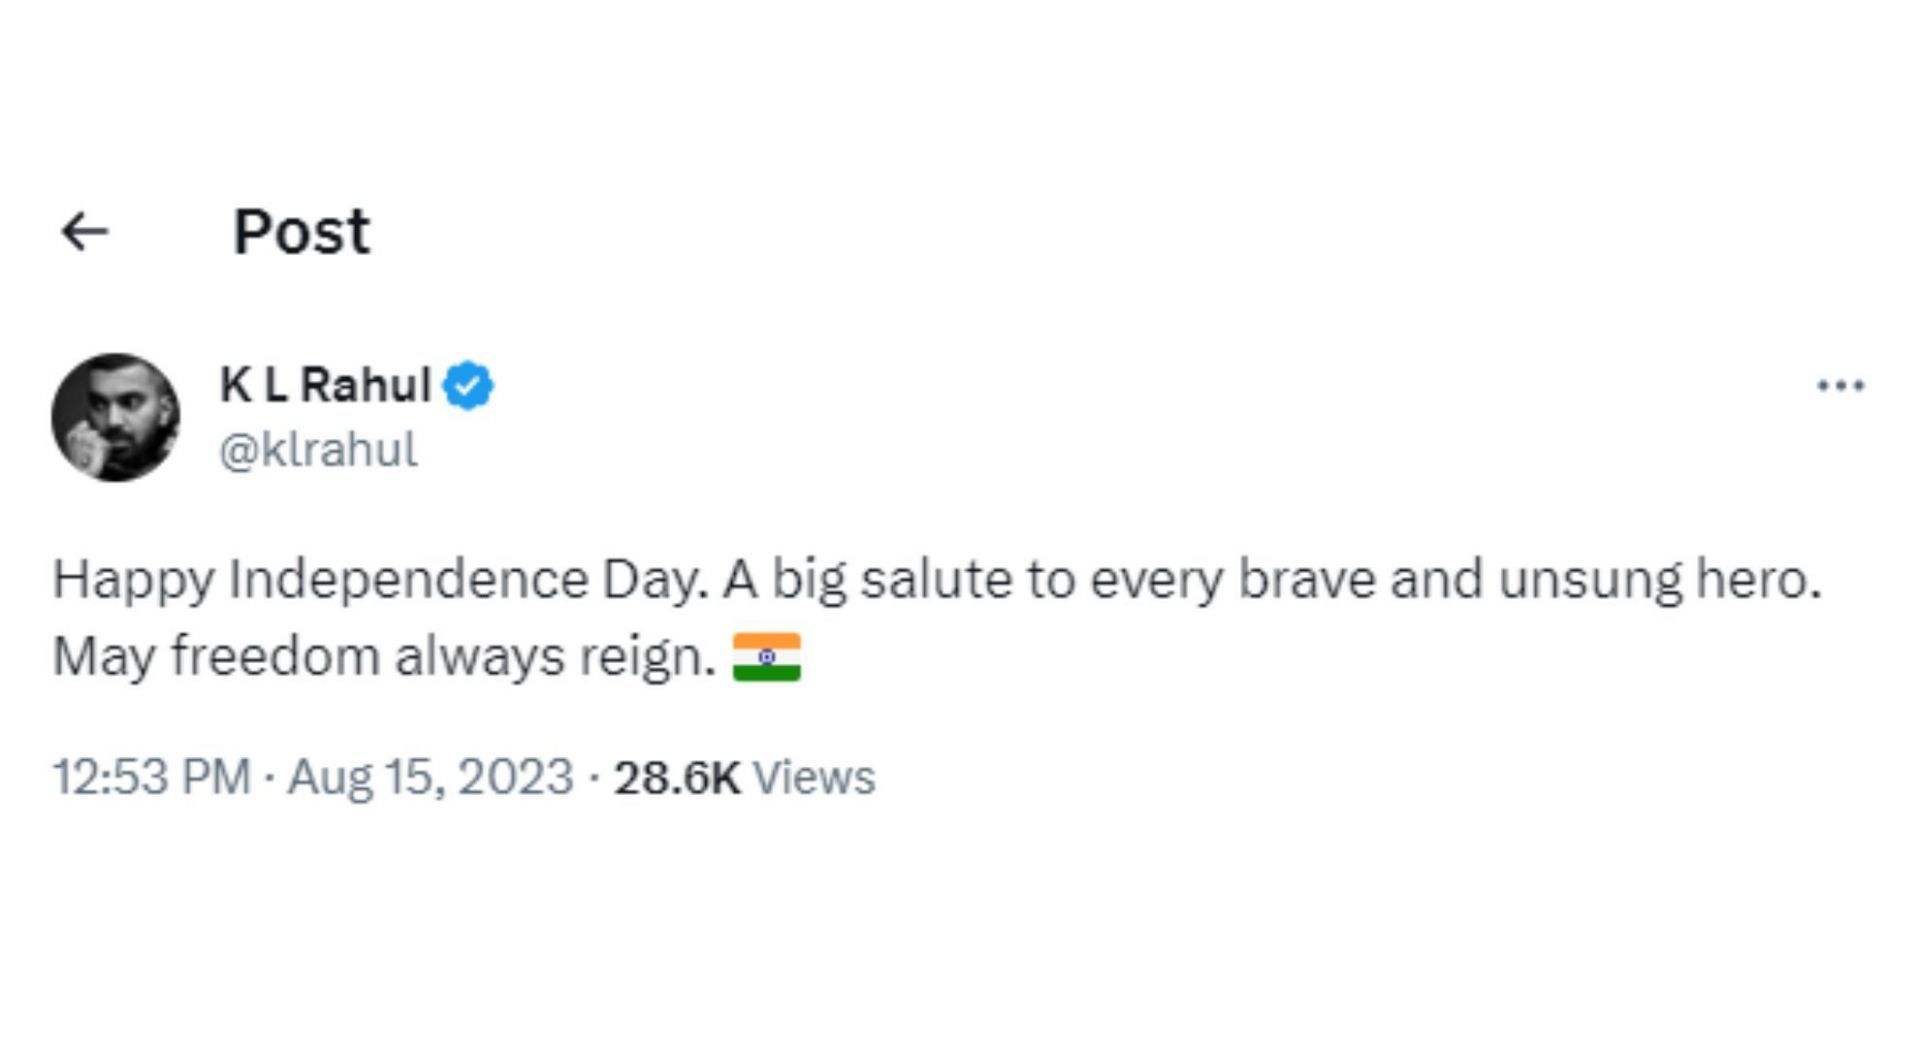 KL Rahul, who is likely to make his comeback in Asia Cup, also shared greetings on Twiter.